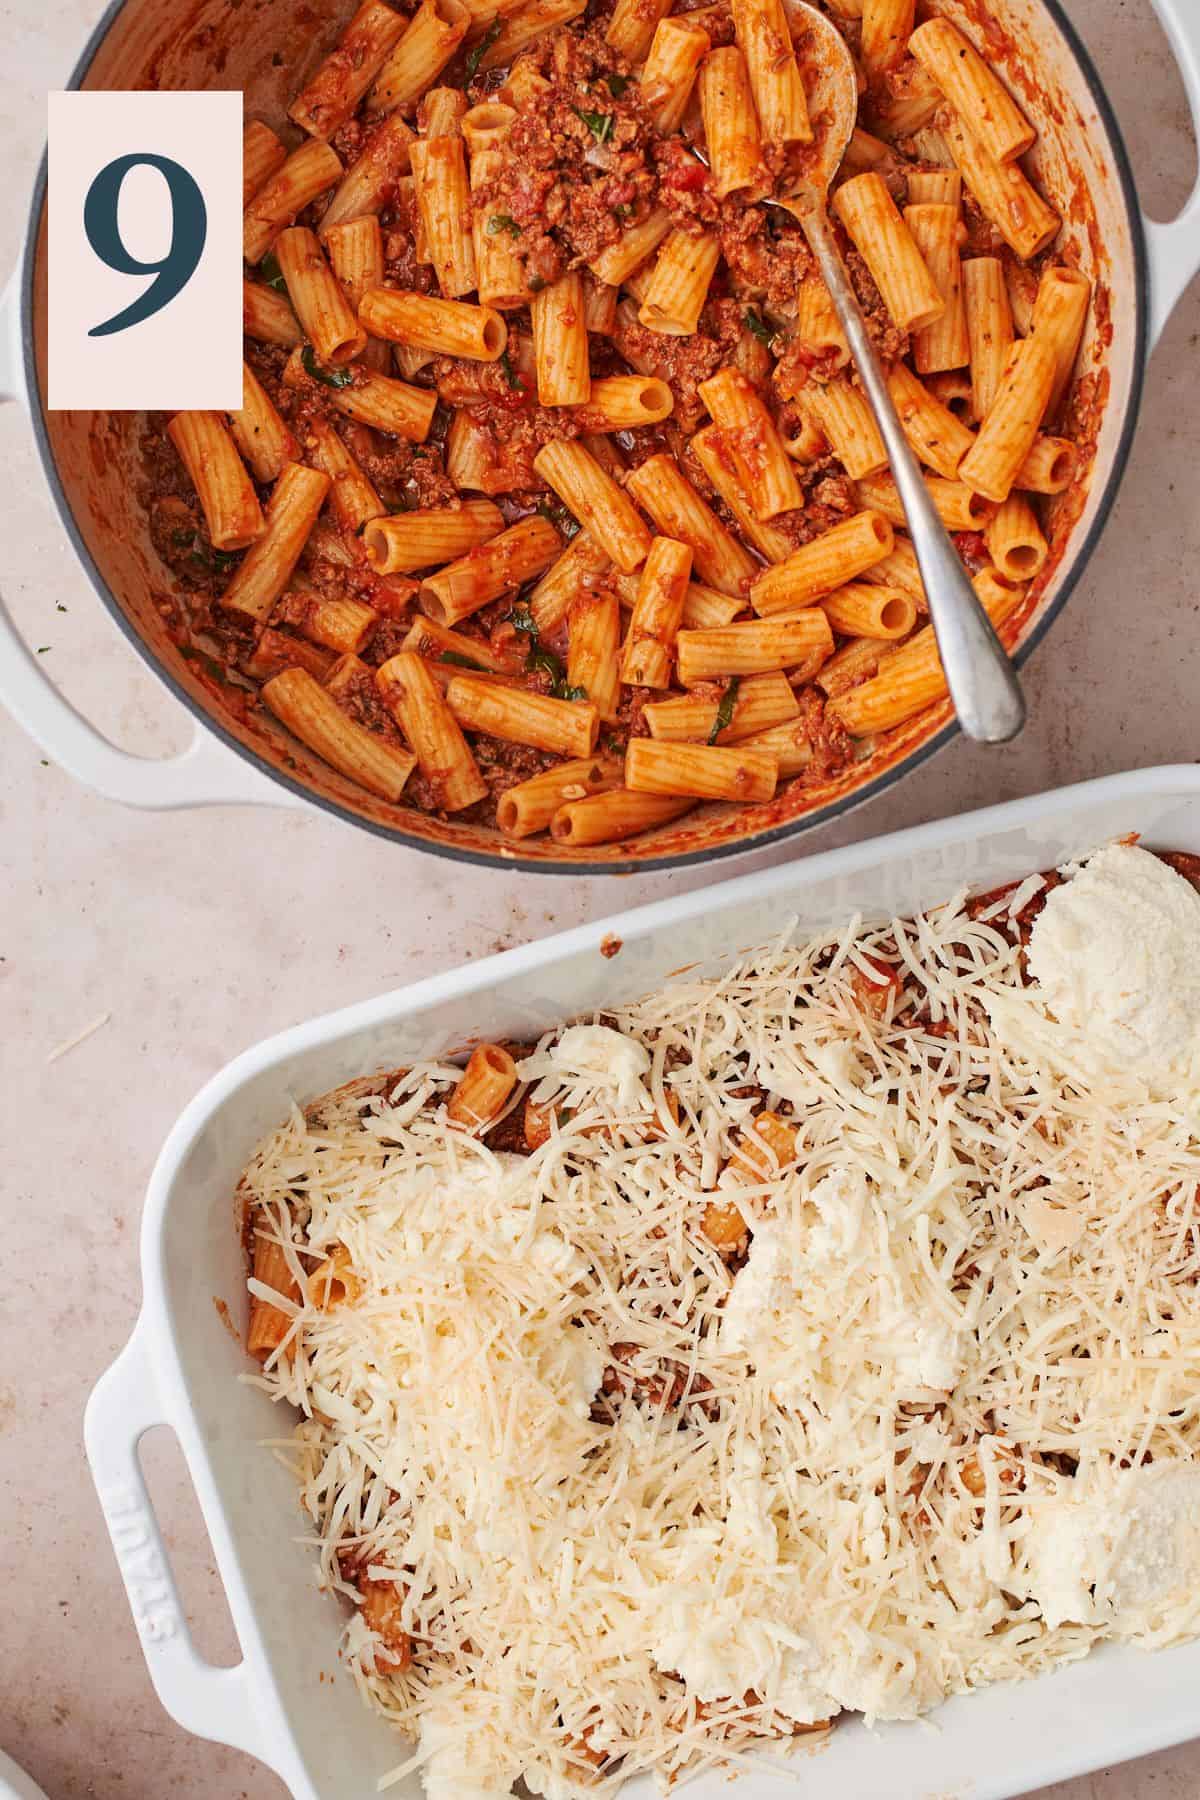 pasta and meat sauce in a baking dish, covered with cheeses, beside a dutch oven full of pasta tossed in meat sauce.